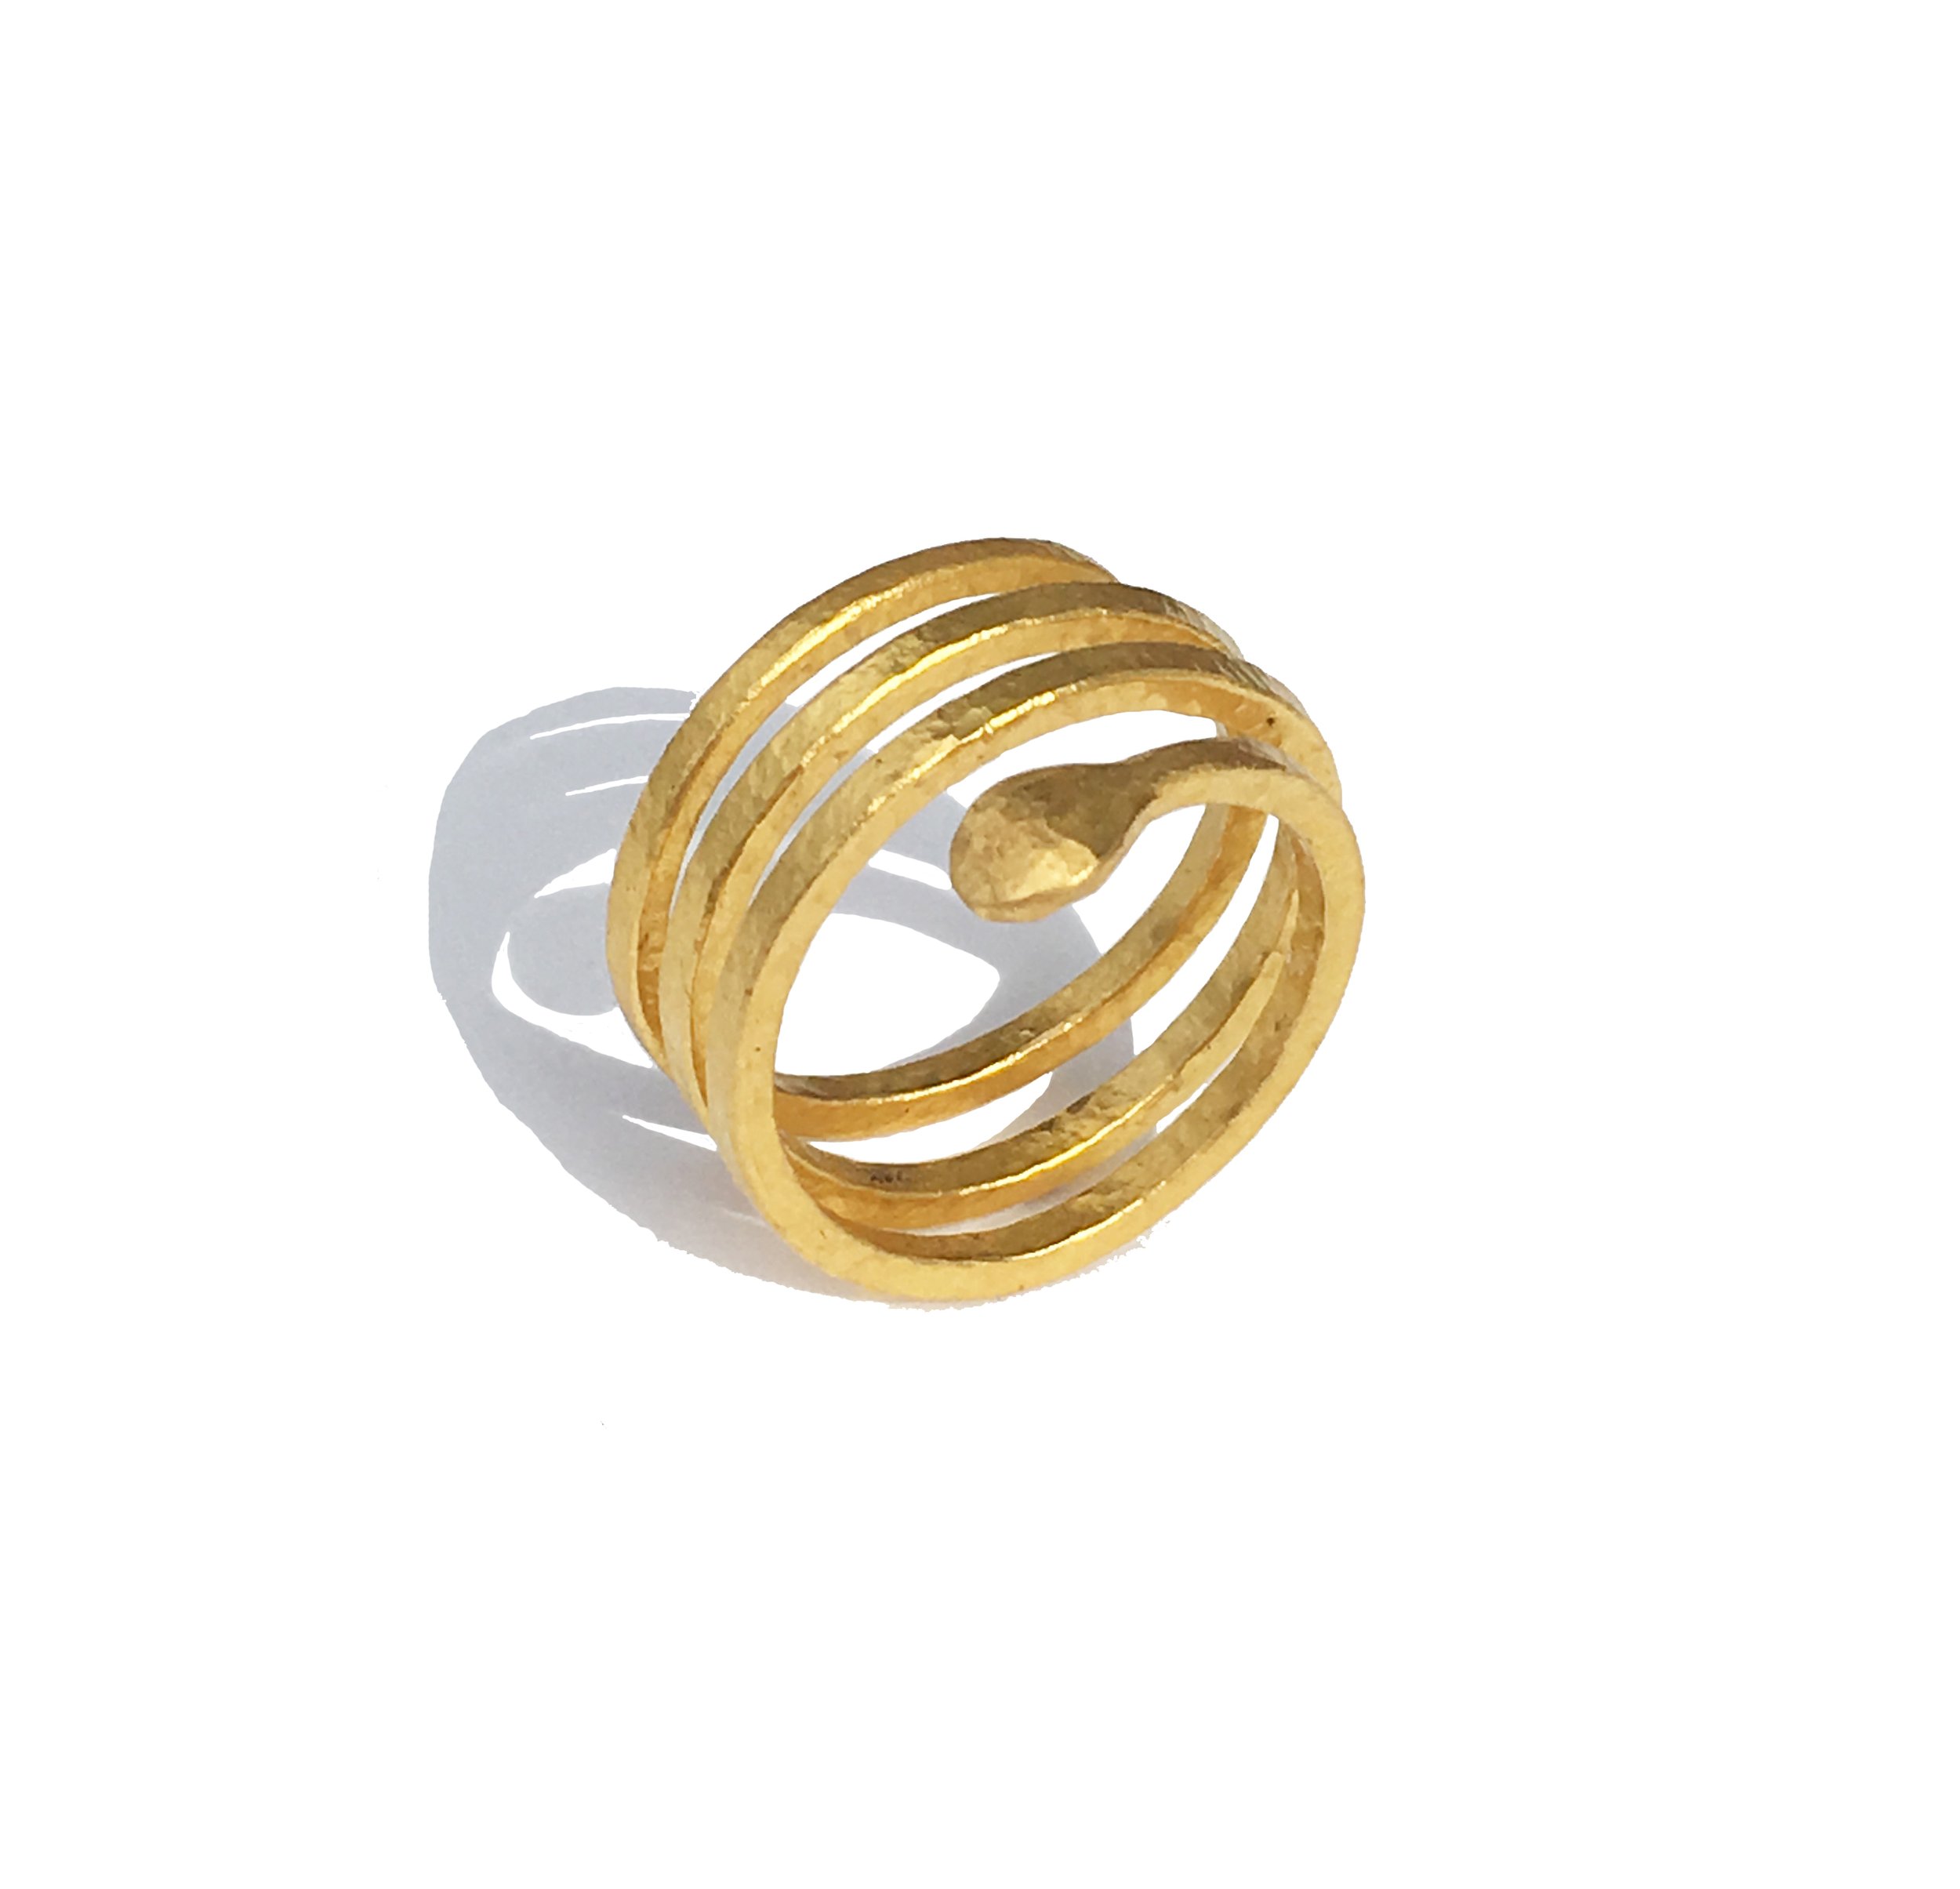 Serpent Coil Ring - 24 K gold — Lucine Almas Jewelry